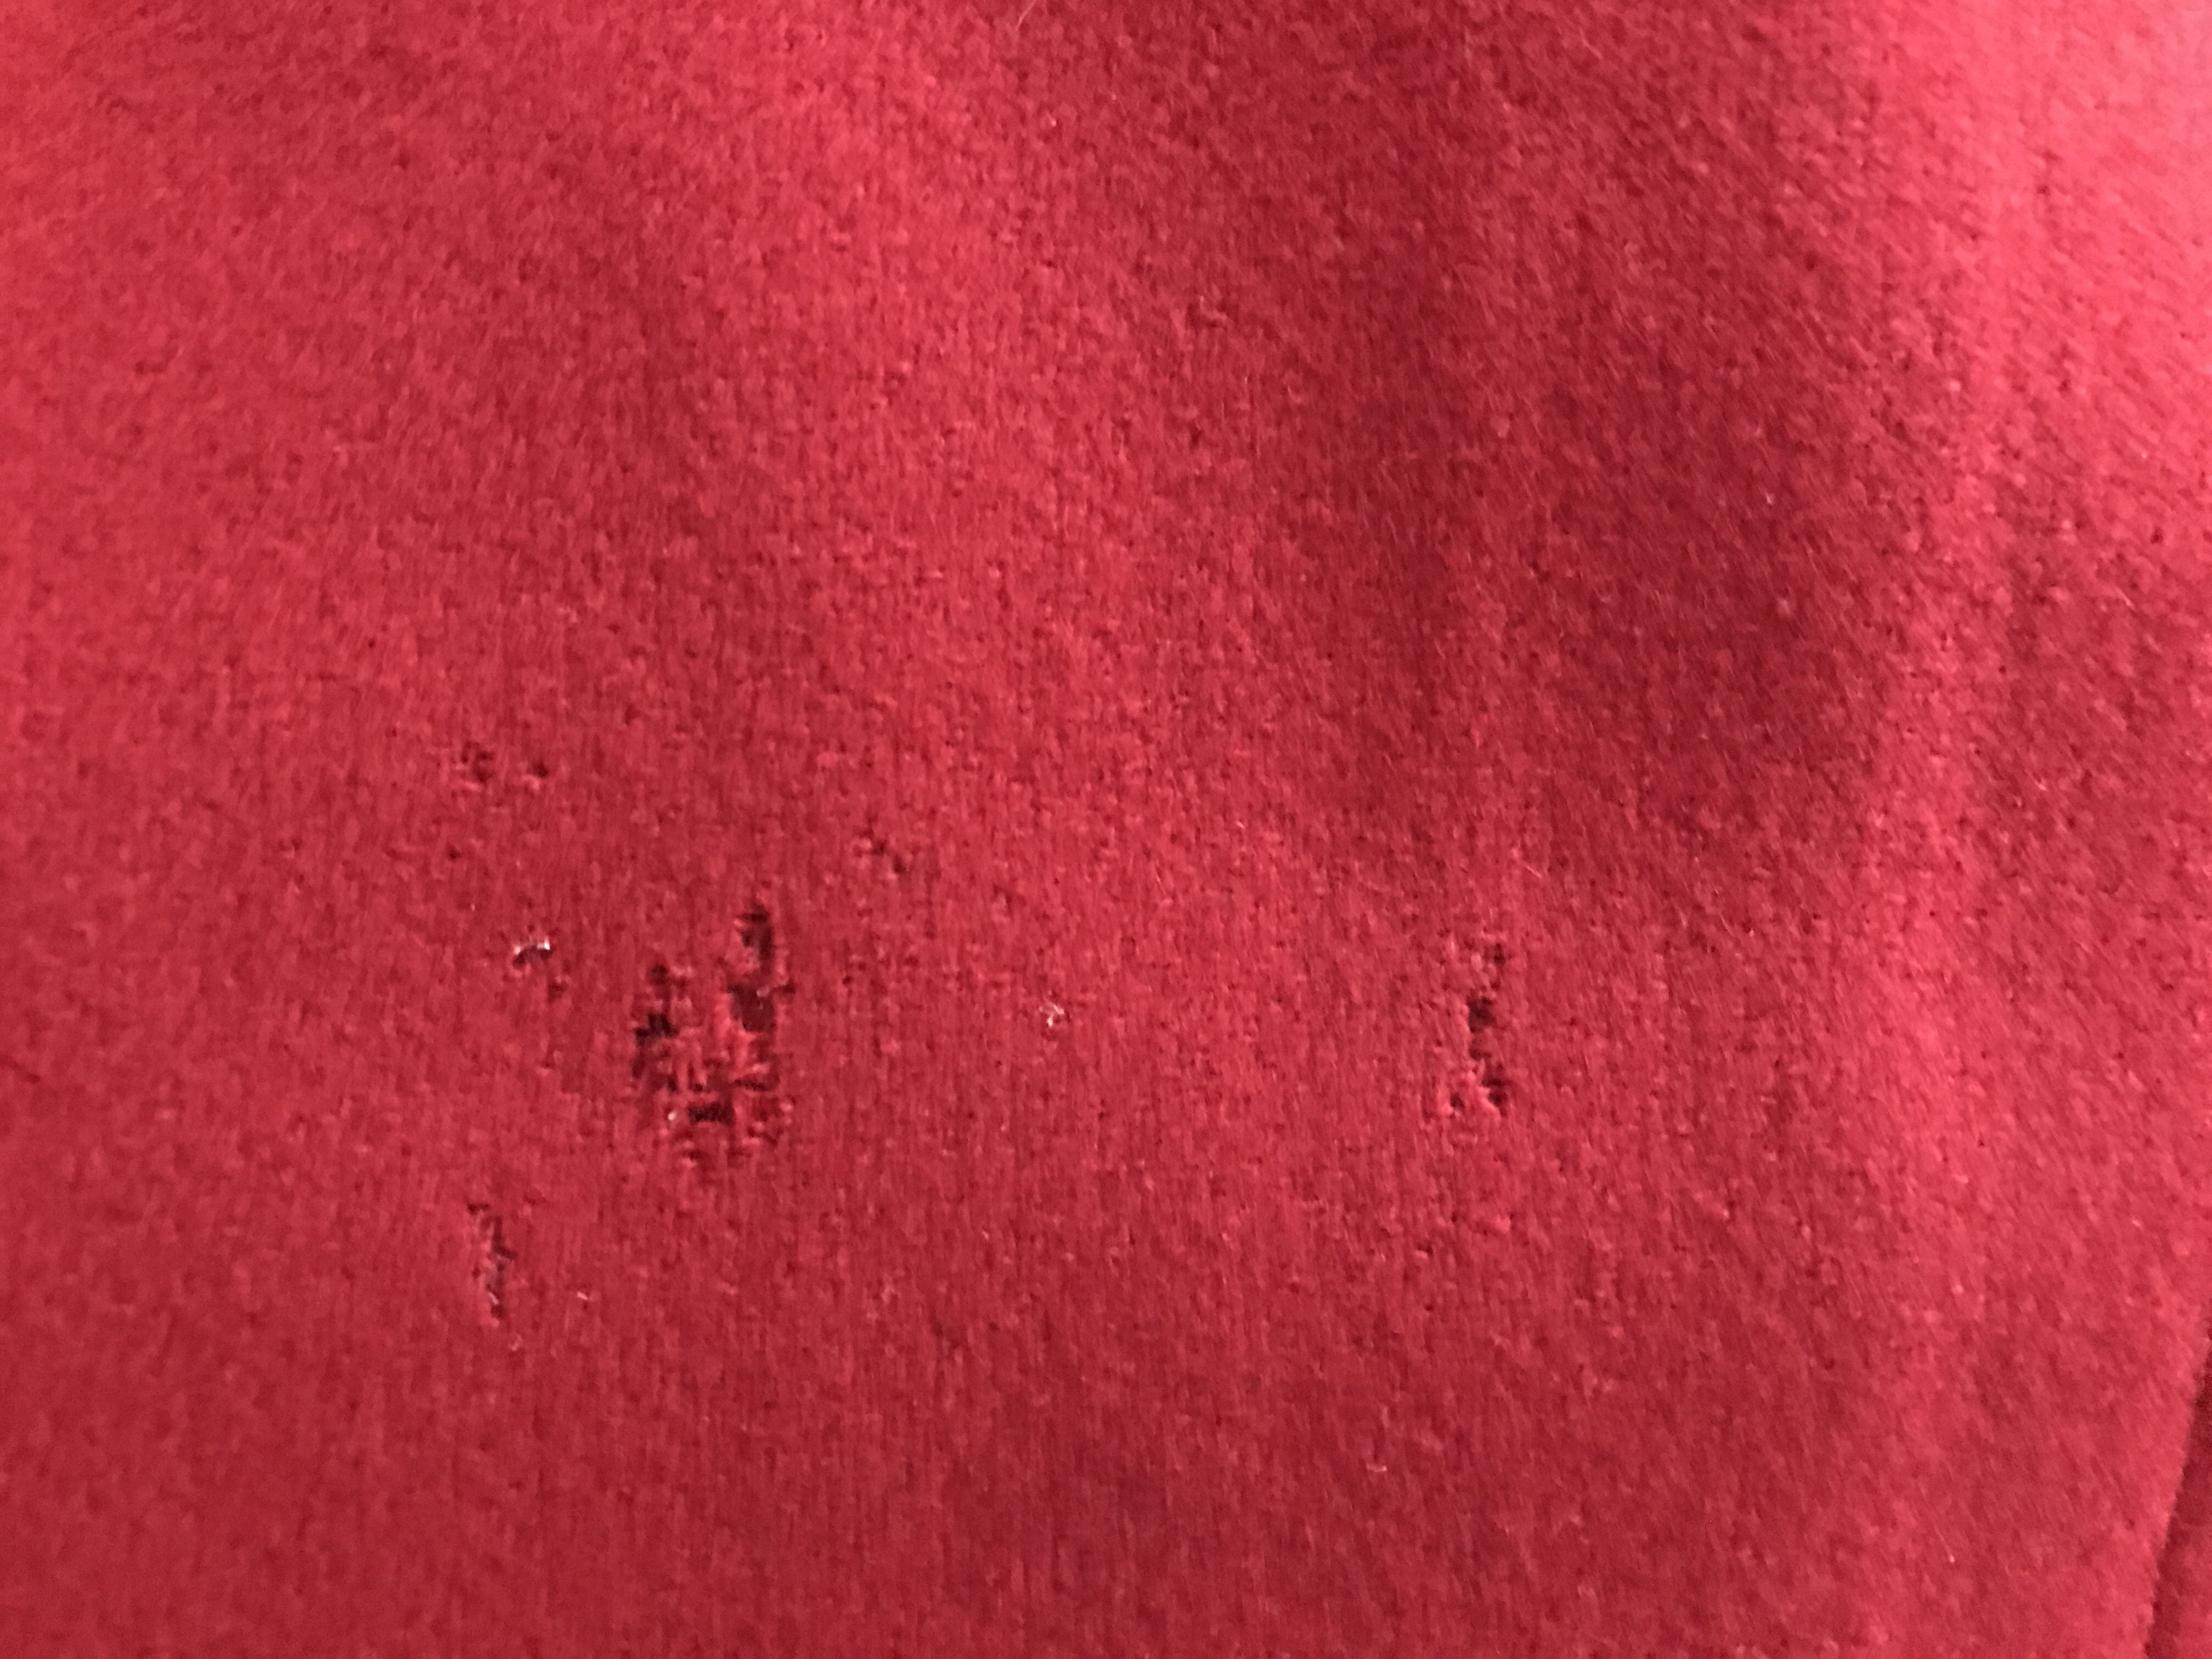 a patch of a red woolen coat showing a hole